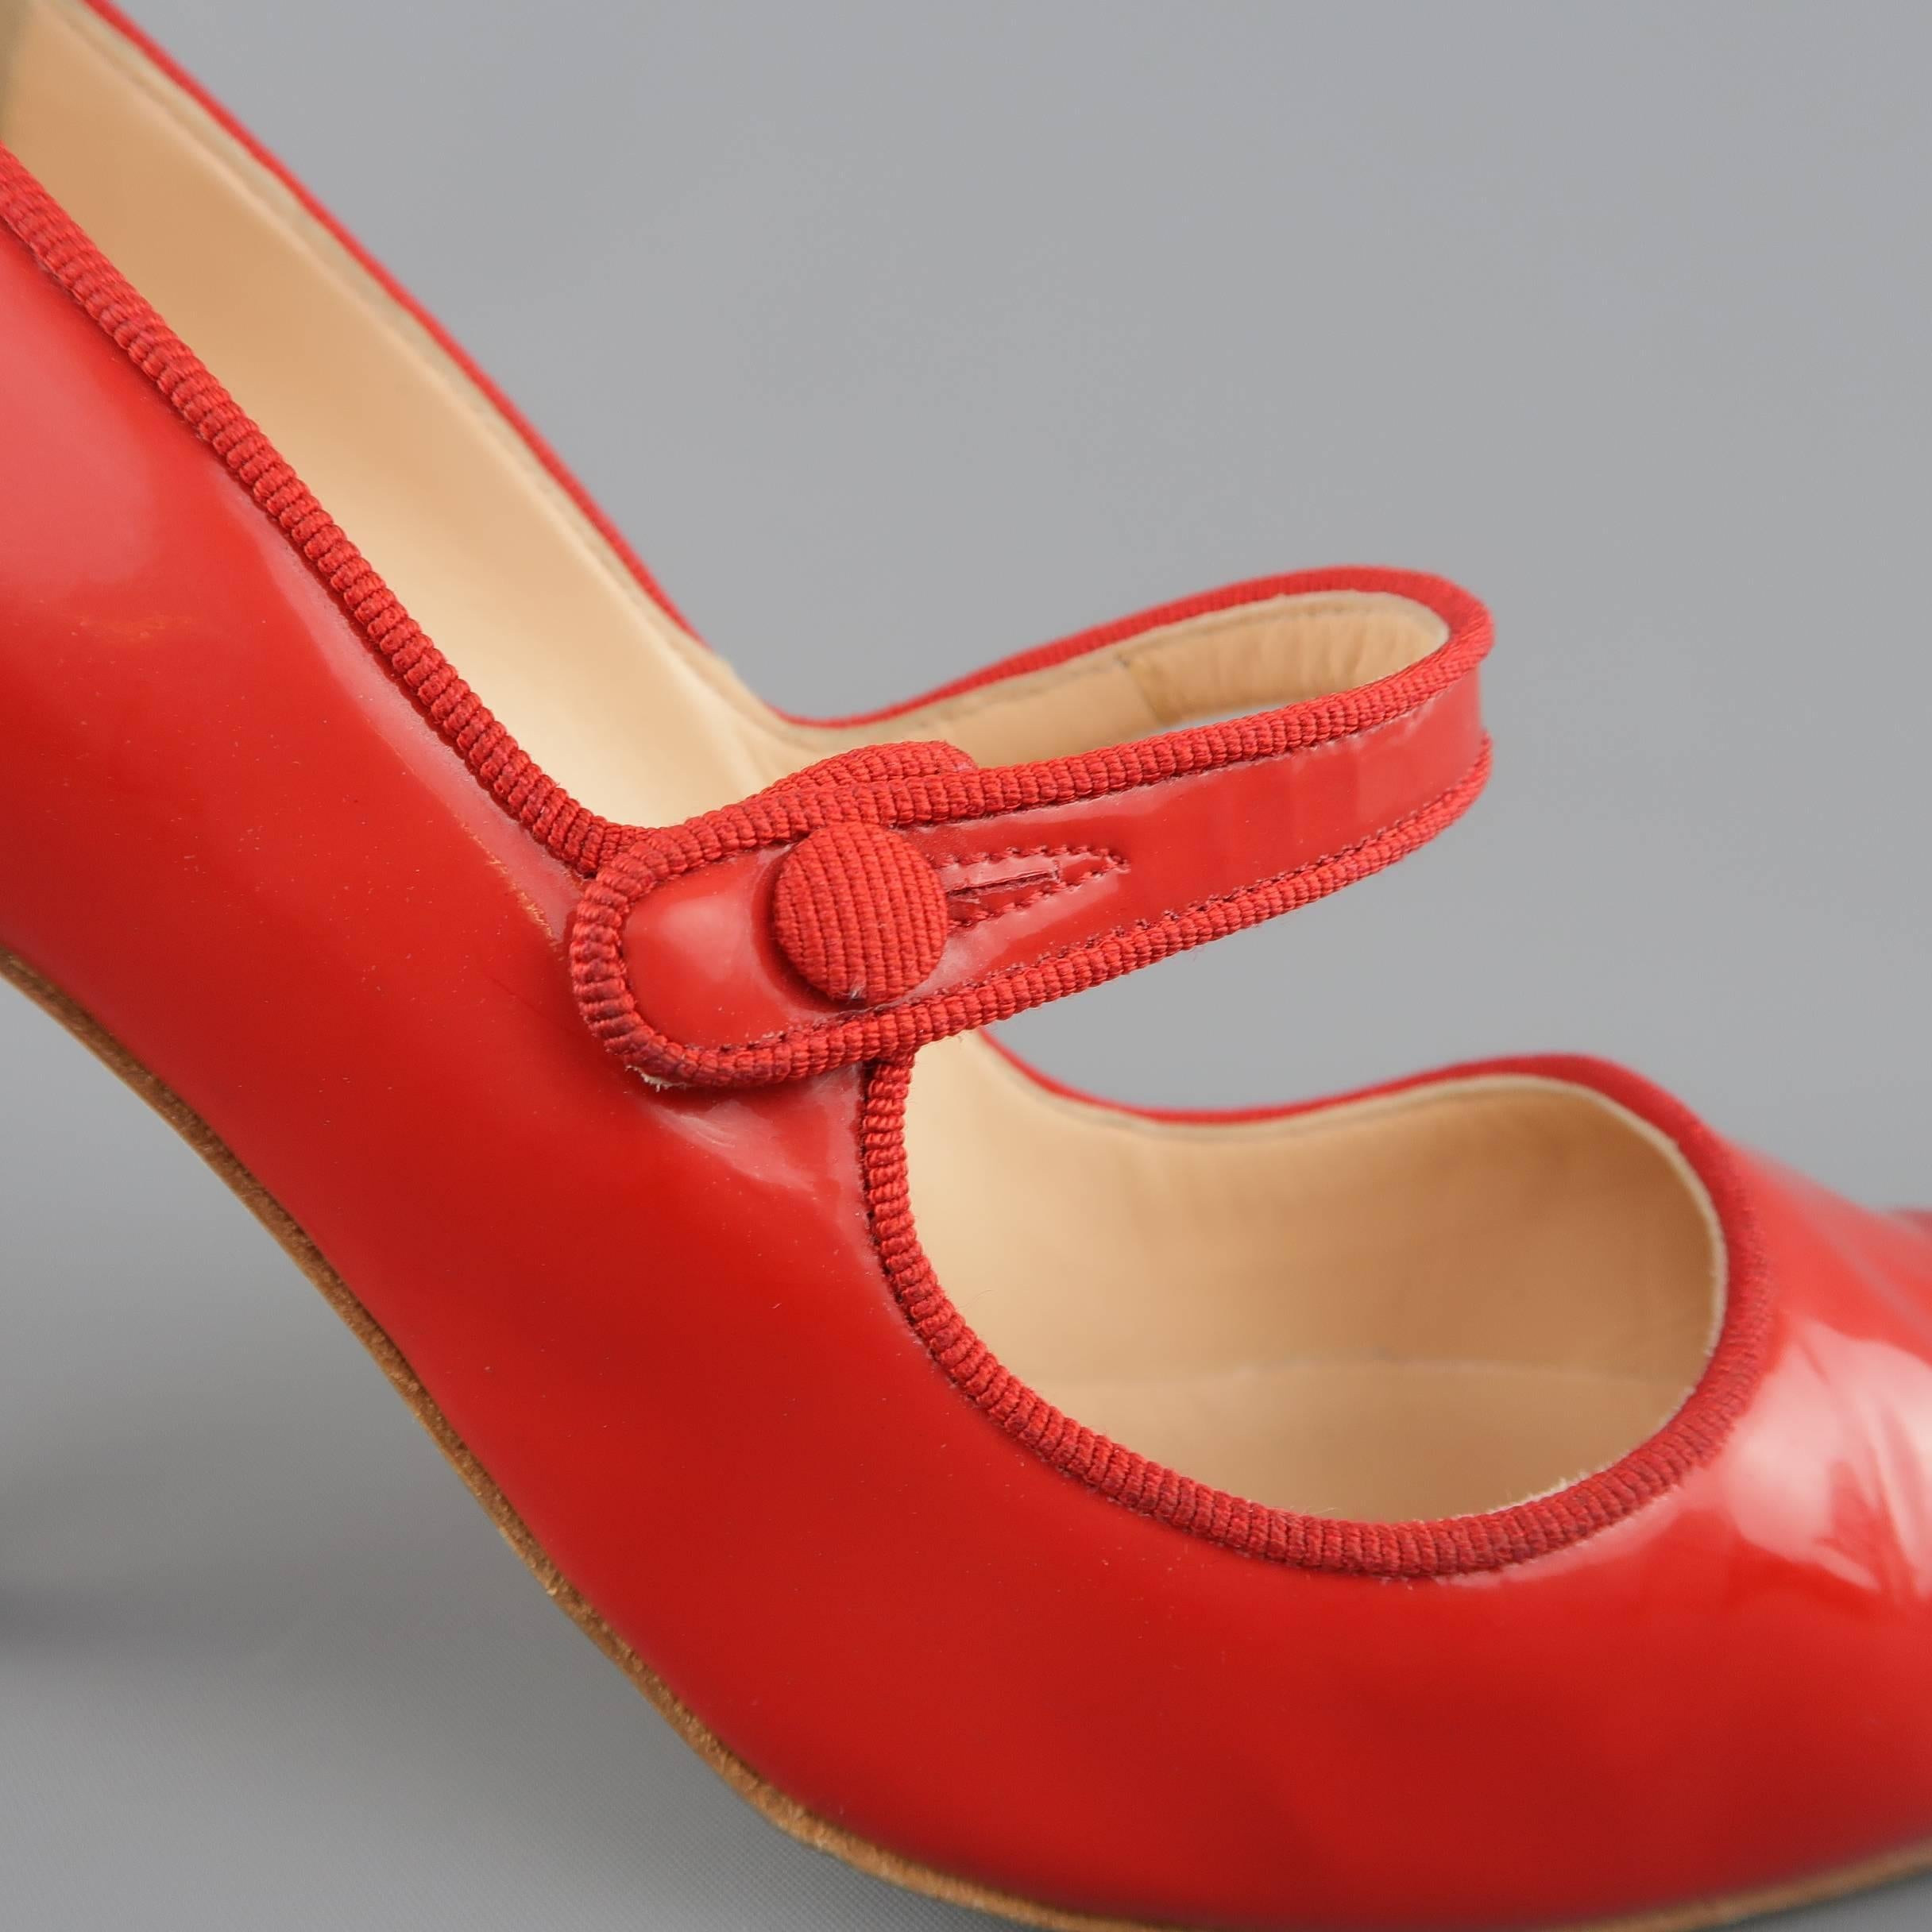 MANOLO BLAHNIK puymps come in semi matte bold red patent leather and feature a signature pointed toe, covered stiletto heel, faille piping and Mary Jane strap. Minor wear. With box. Made in Italy.
 
Good Pre-Owned Condition.
Marked: IT 39
